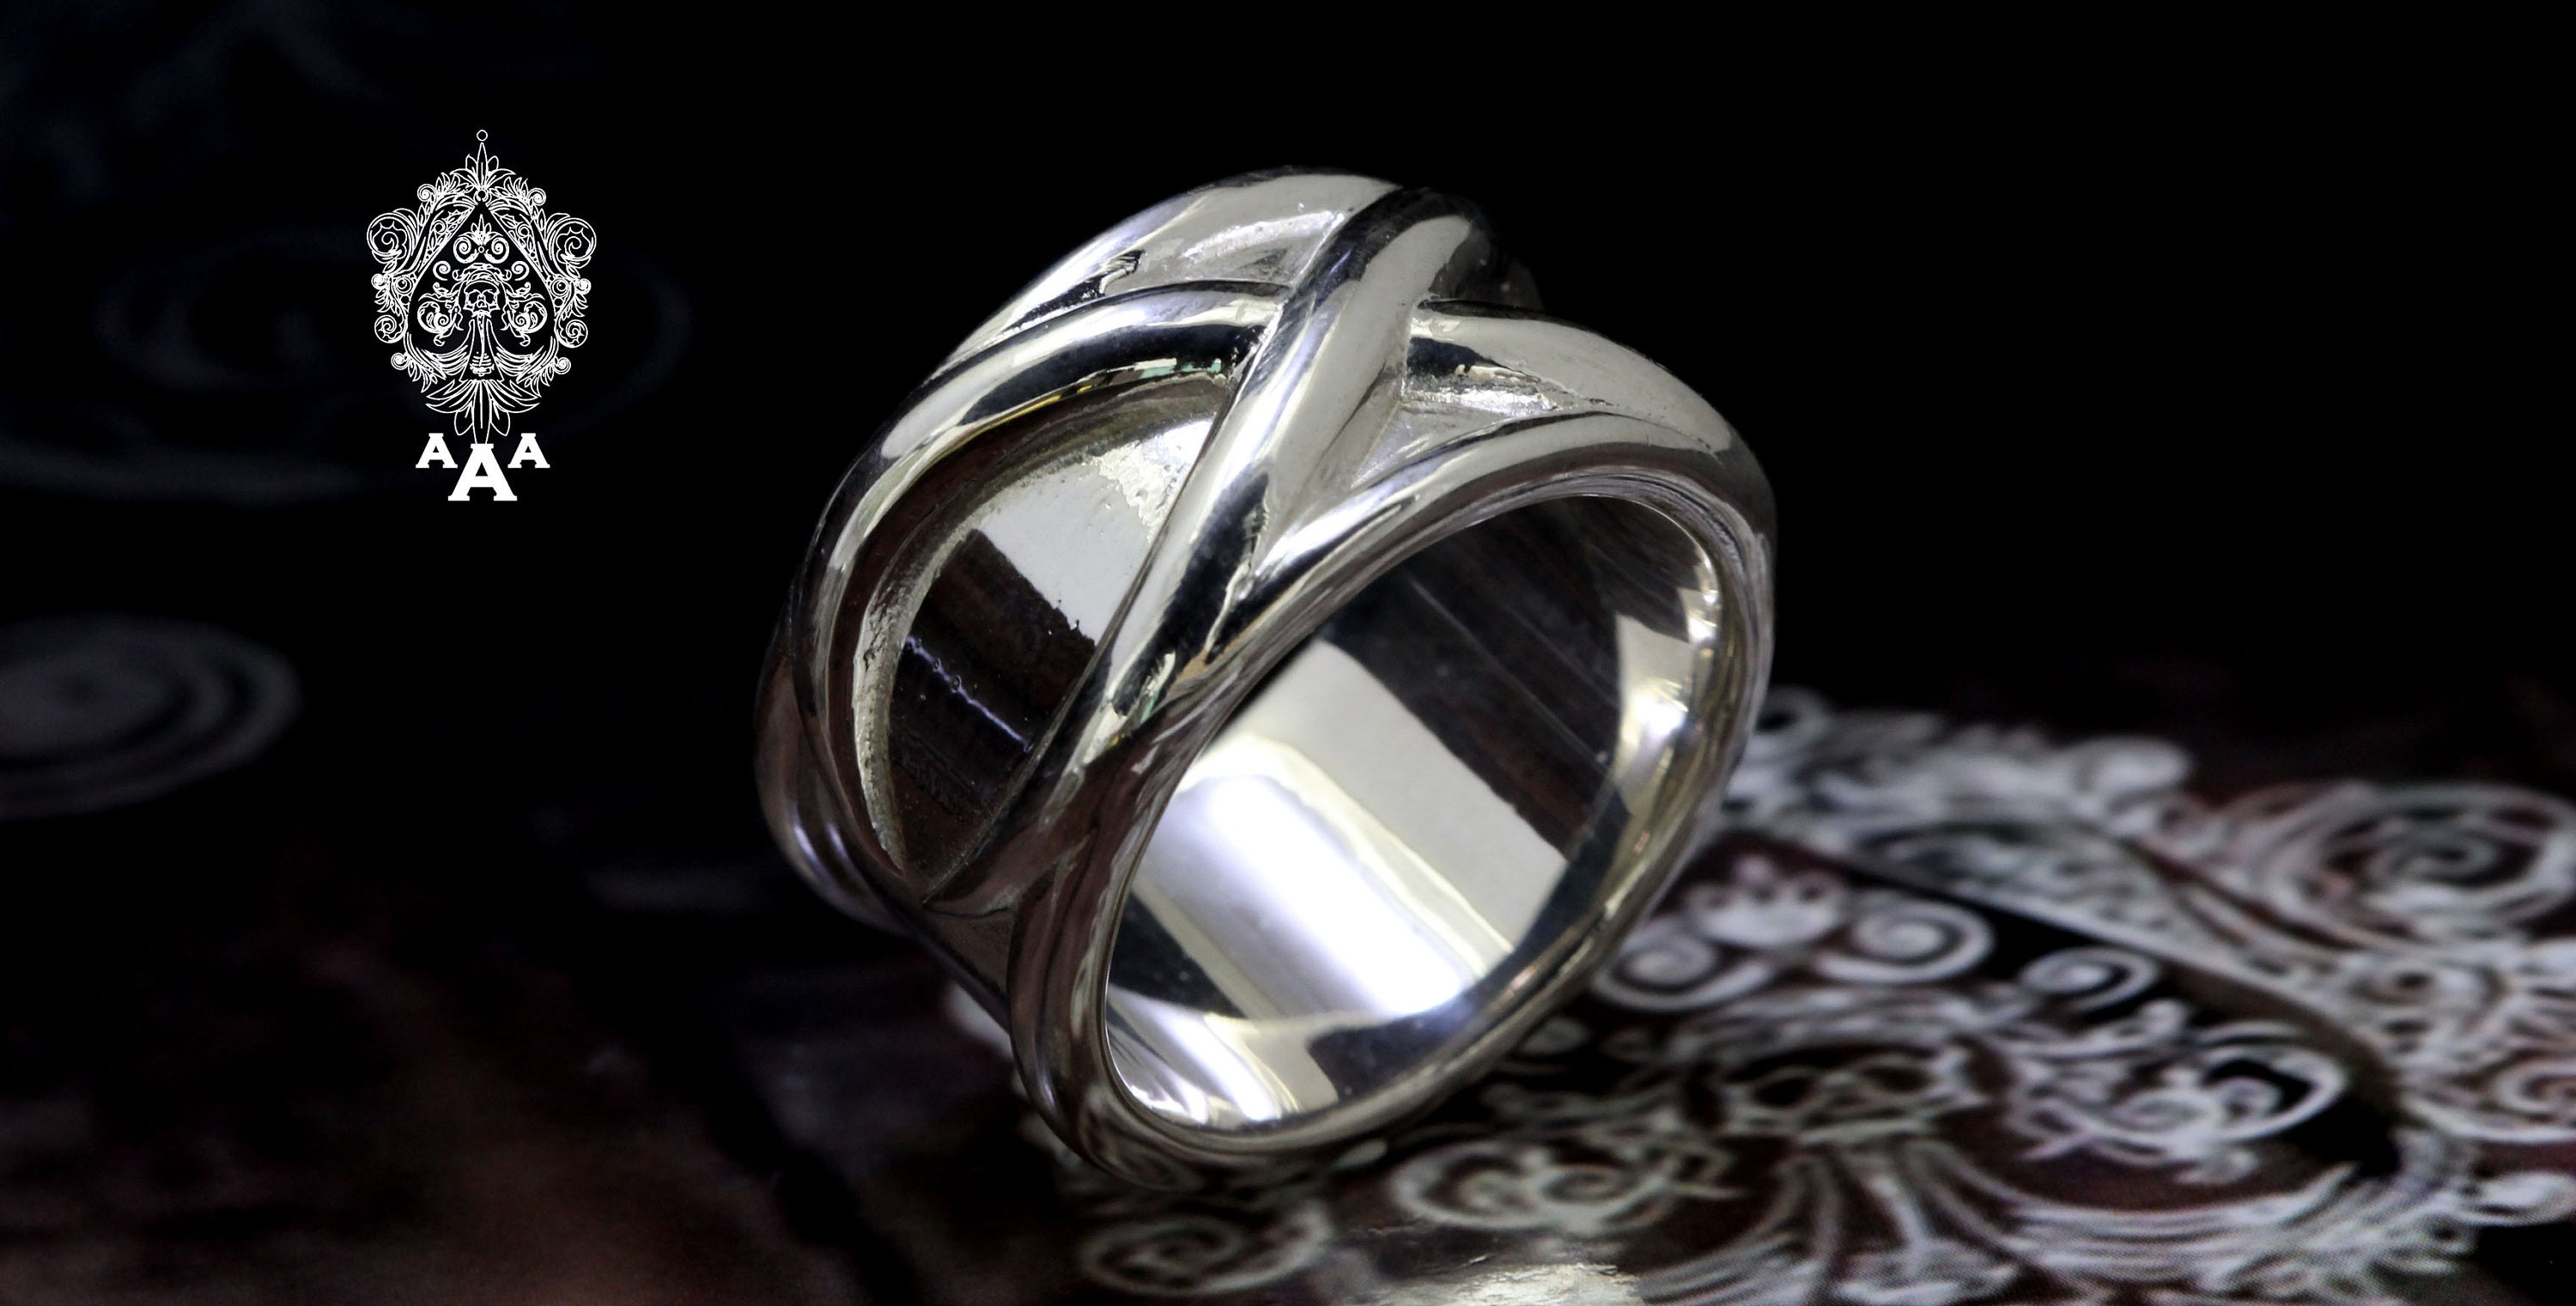 Anime Goku Black Kakarotto Time Mens Silver Wedding Bands Adjustable Metal  Jewelry For Cosplay Costumes Unisex Mens Prop Accessory AA230417 From  Fadacai03, $10.09 | DHgate.Com